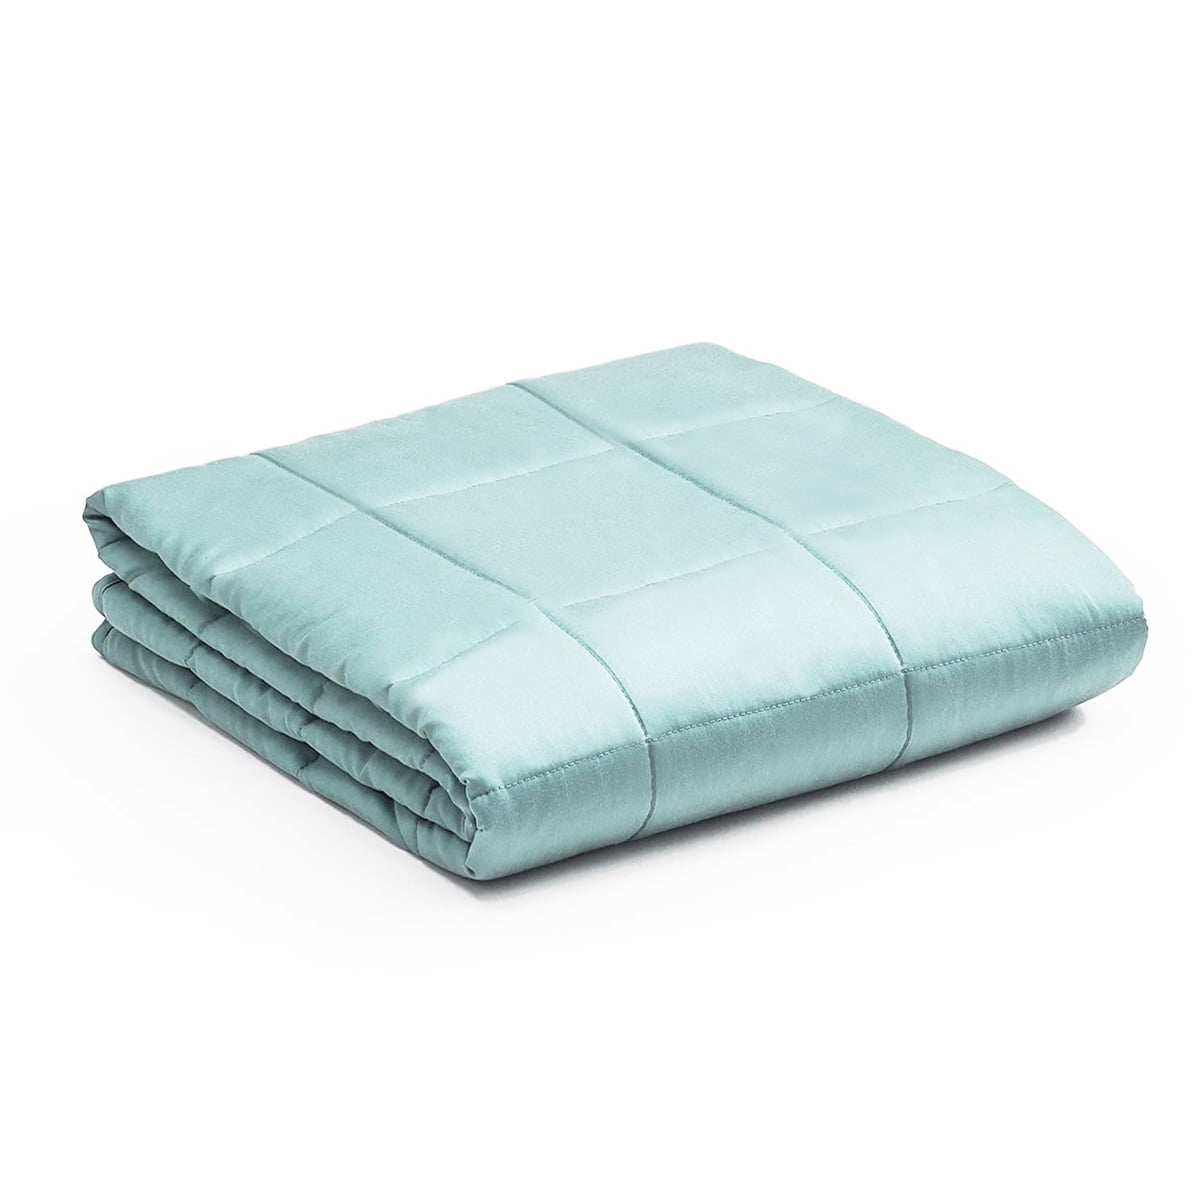 Premium Cooling Weighted Blanket 20 lb 60x80" Sensory Cooling Stress Relieve New 